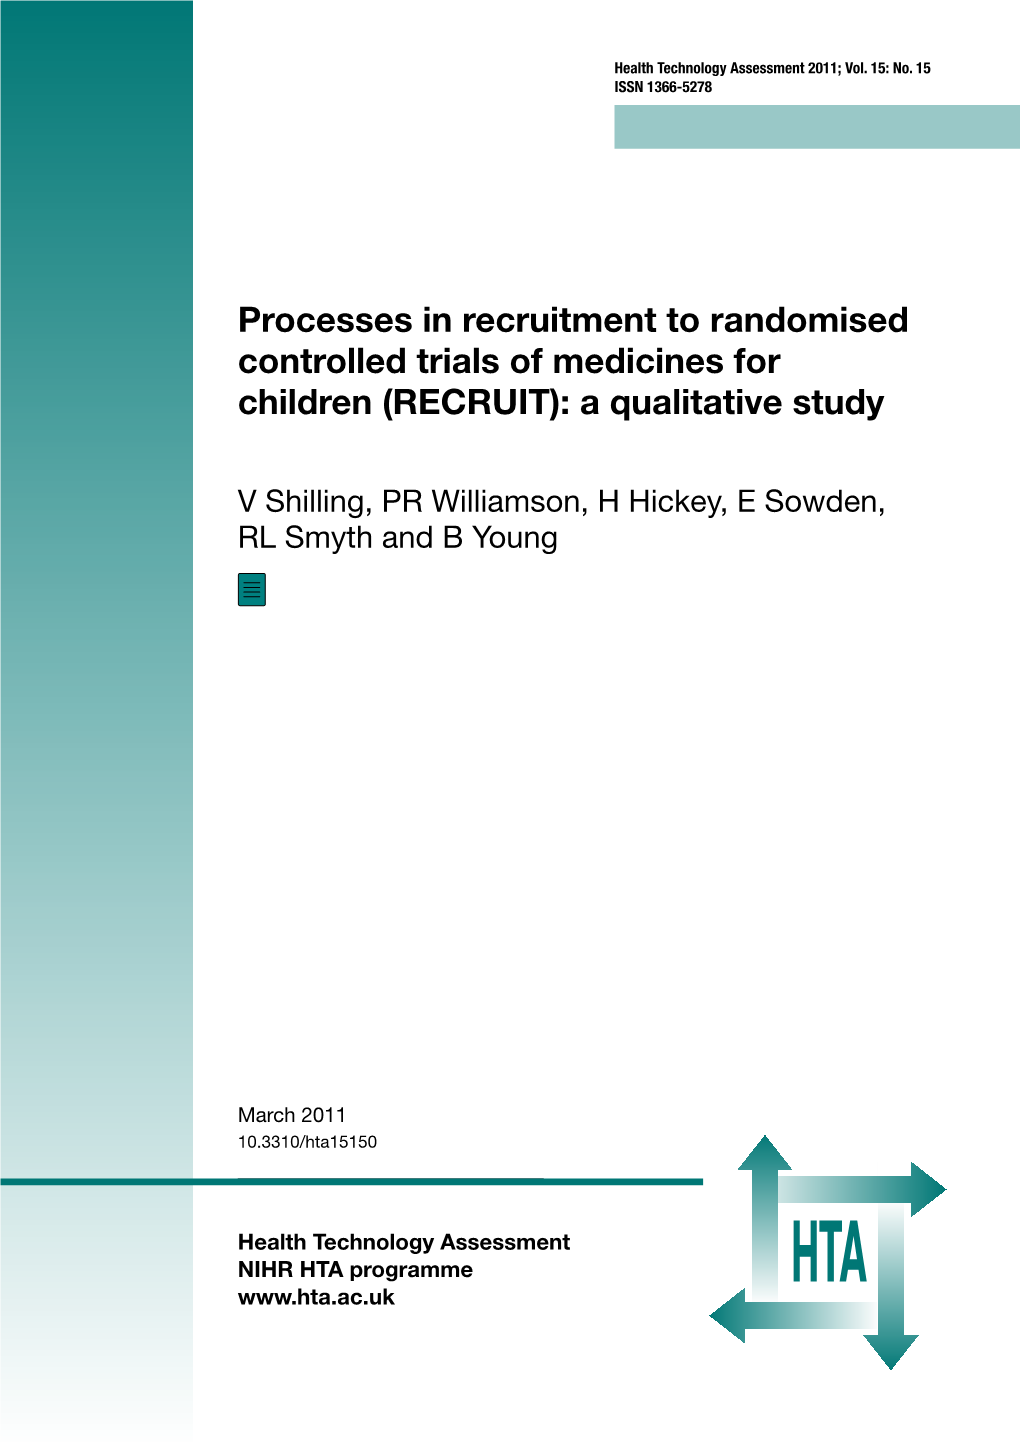 Processes in Recruitment to Randomised Controlled Trials of Medicines for Children (RECRUIT): a Qualitative Study